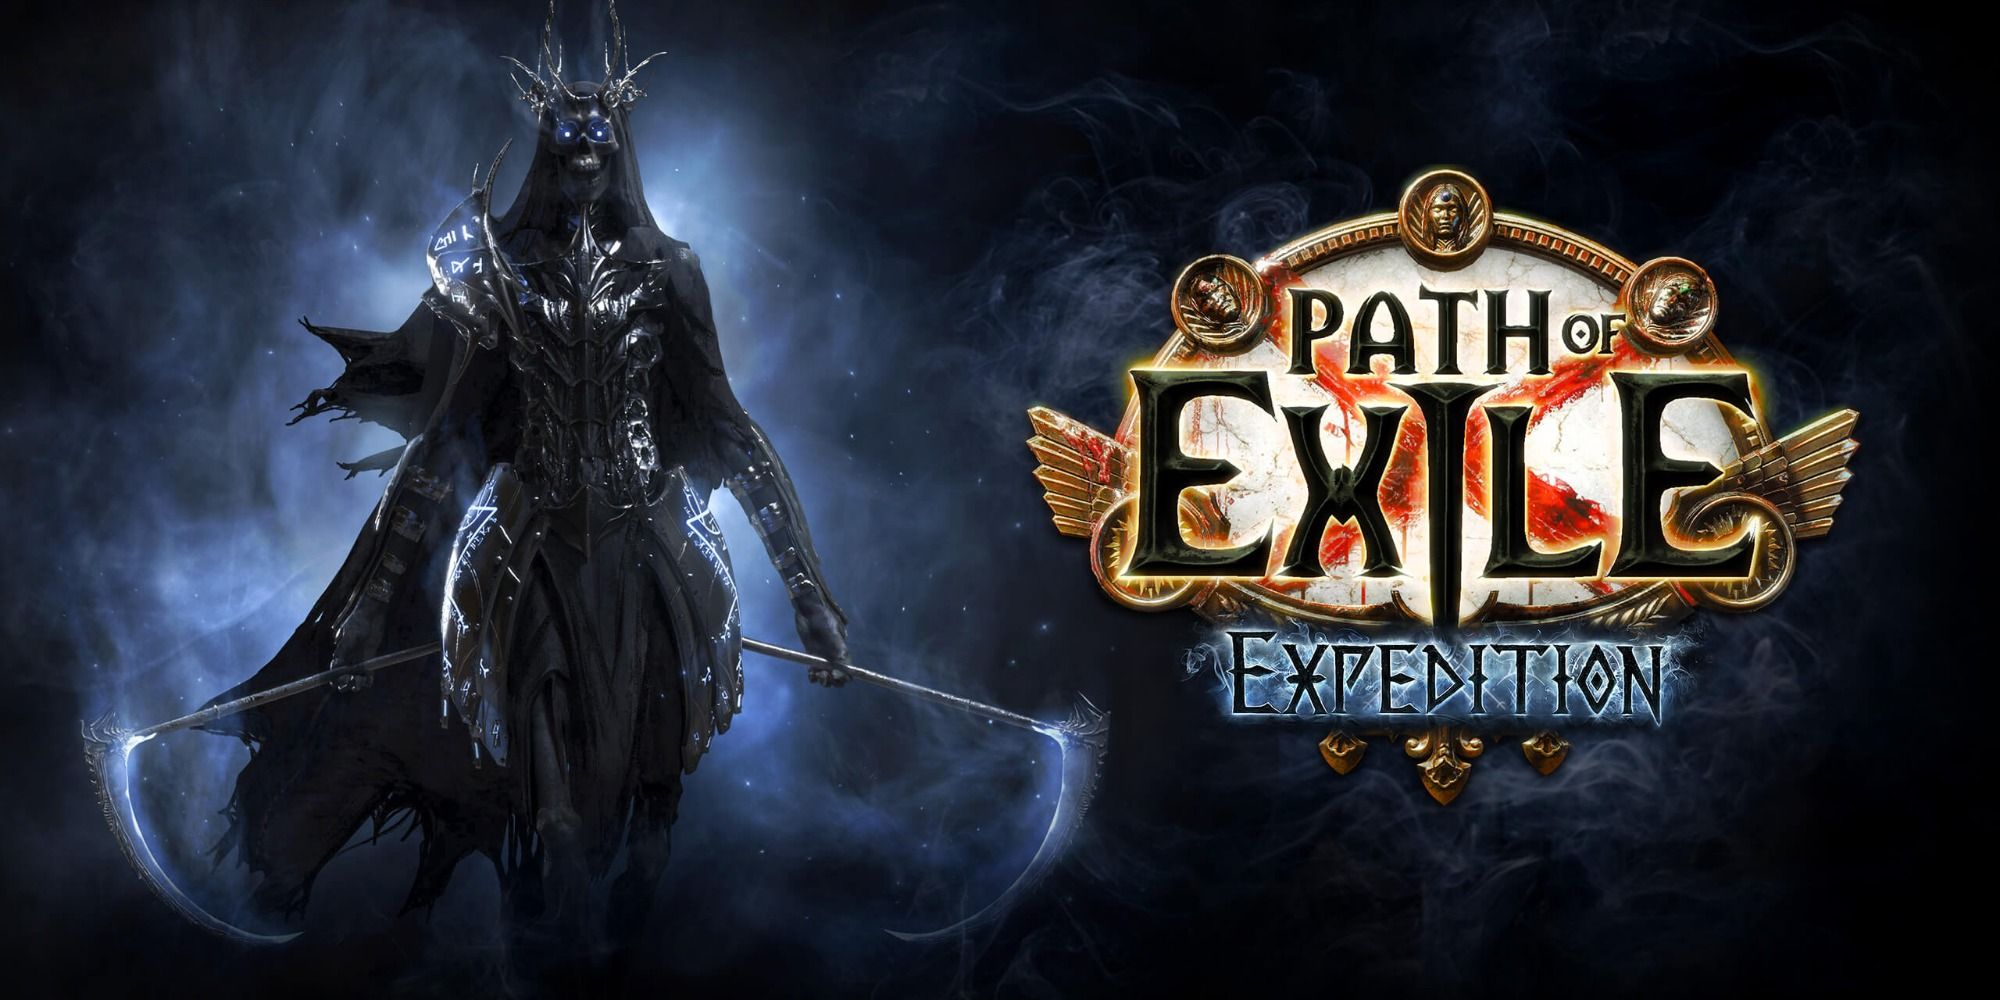 Title art for Path of Exile with a skeletal creature wielding double scythes against a dark glowy background